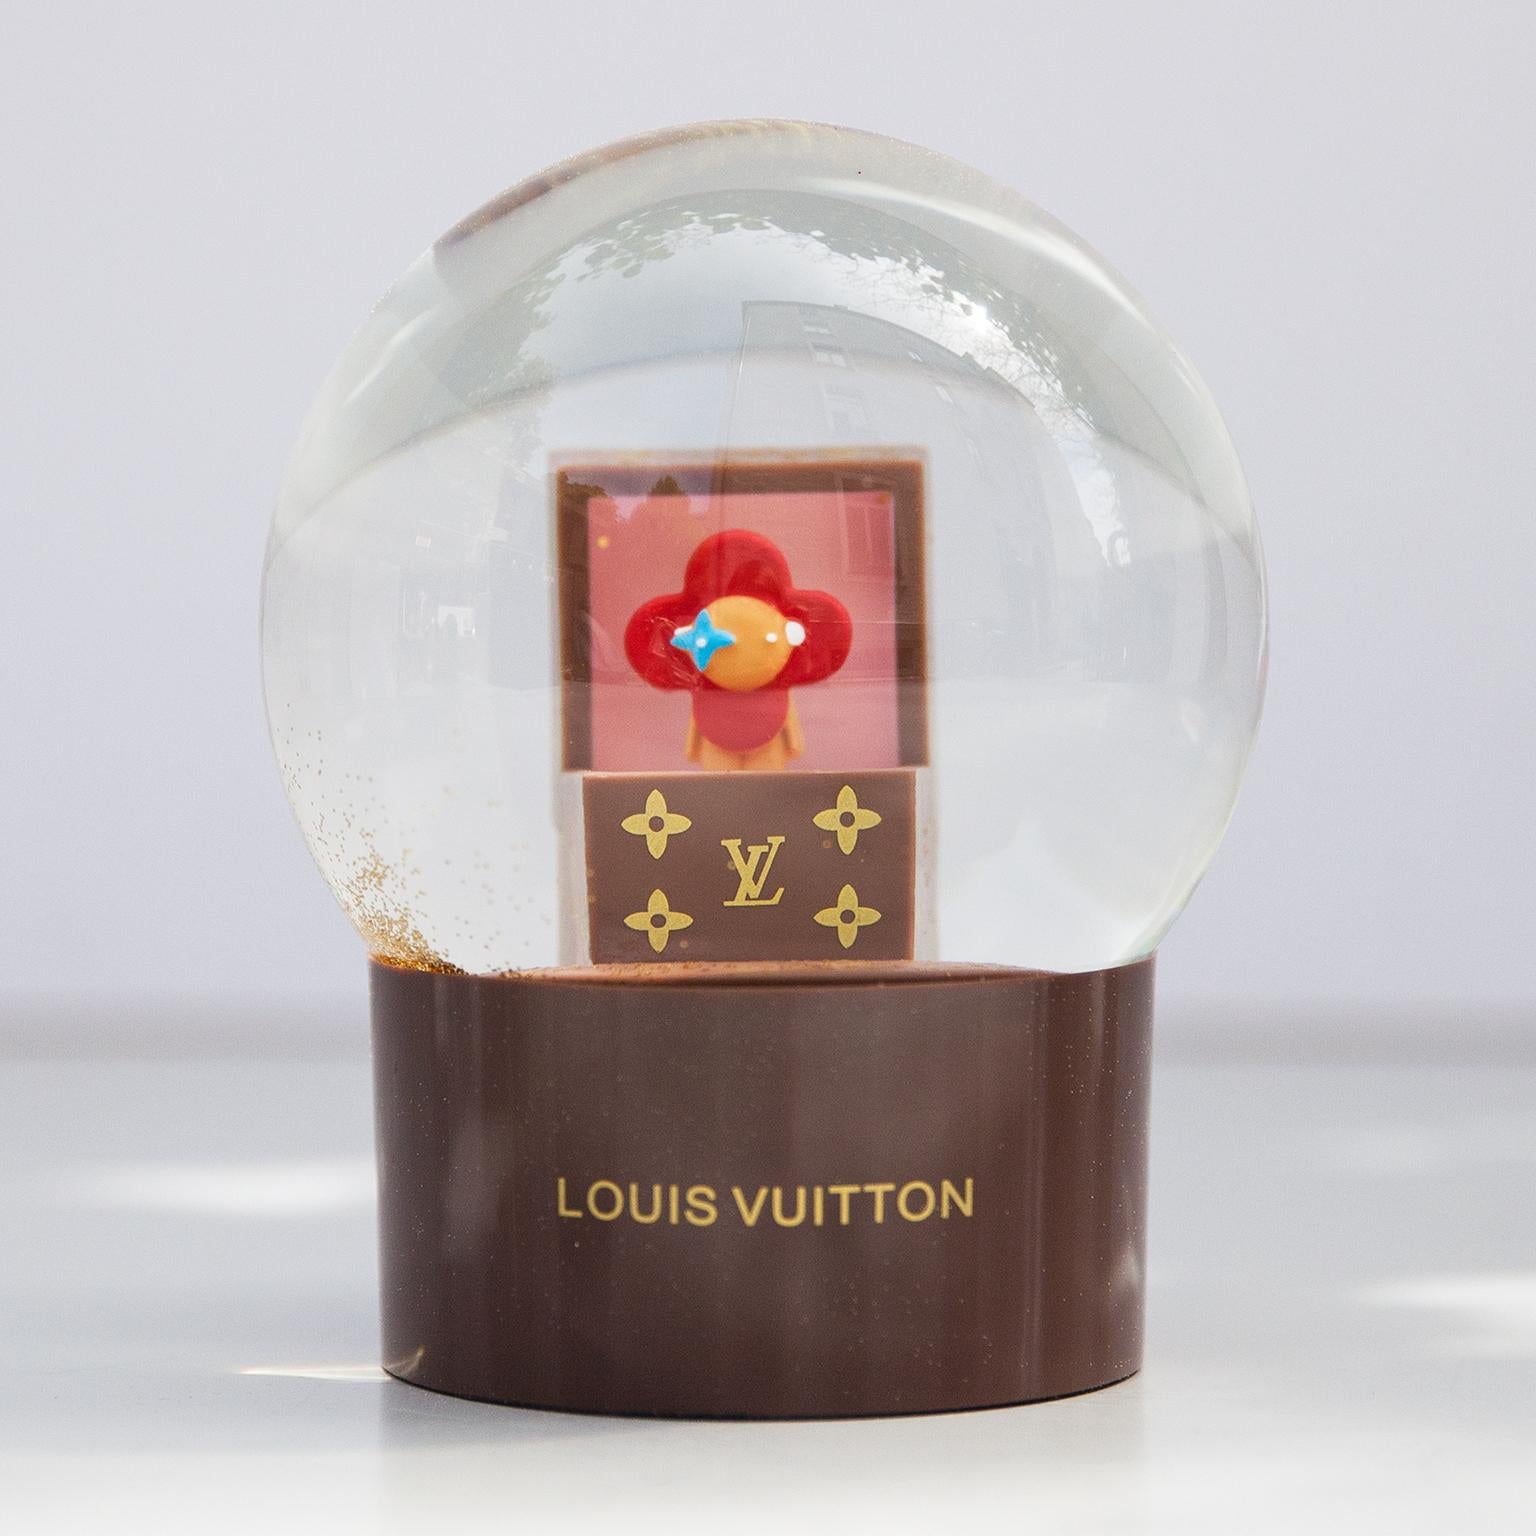 Rare limited edition of a Louis Vuitton snow ball, which are only for VIP Customers in excellent condition and with the original box.
   